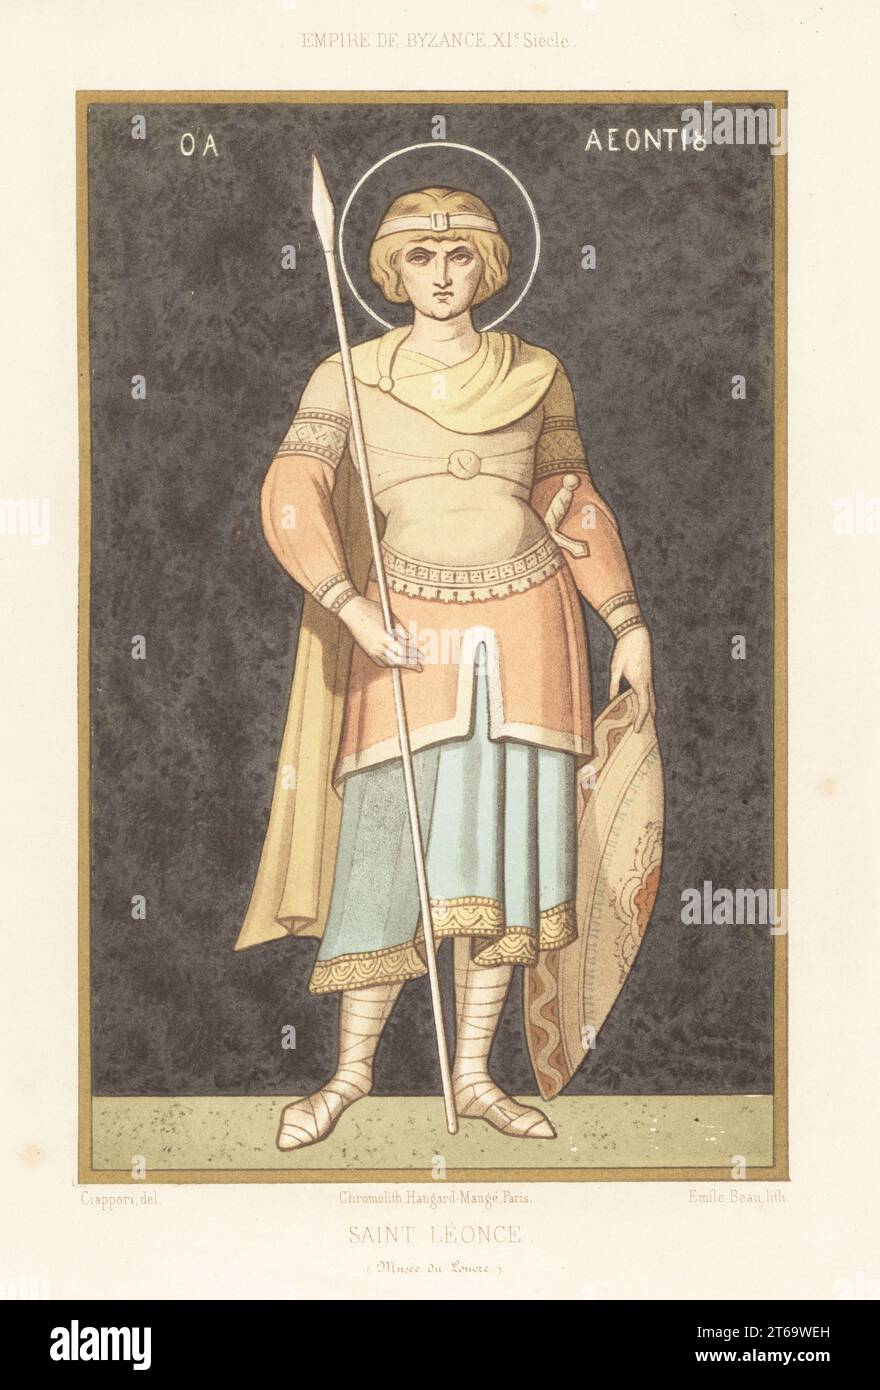 Saint Leonce of Tripoli, Phoenician soldier and martyr, 4th century. In Byzantine military costume of the 11th century. From a painting by Dominique Papety made in the Agia Lavra Monastery, Mt. Athos, now in the Louvre. Saint Leonce, Empire de Byzance, XIe Siecle. Chromolithograph by Emile Beau after an illustration by Claudius Joseph Ciappori from Charles Louandres Les Arts Somptuaires, The Sumptuary Arts, Hangard-Mauge, Paris, 1858. Stock Photo